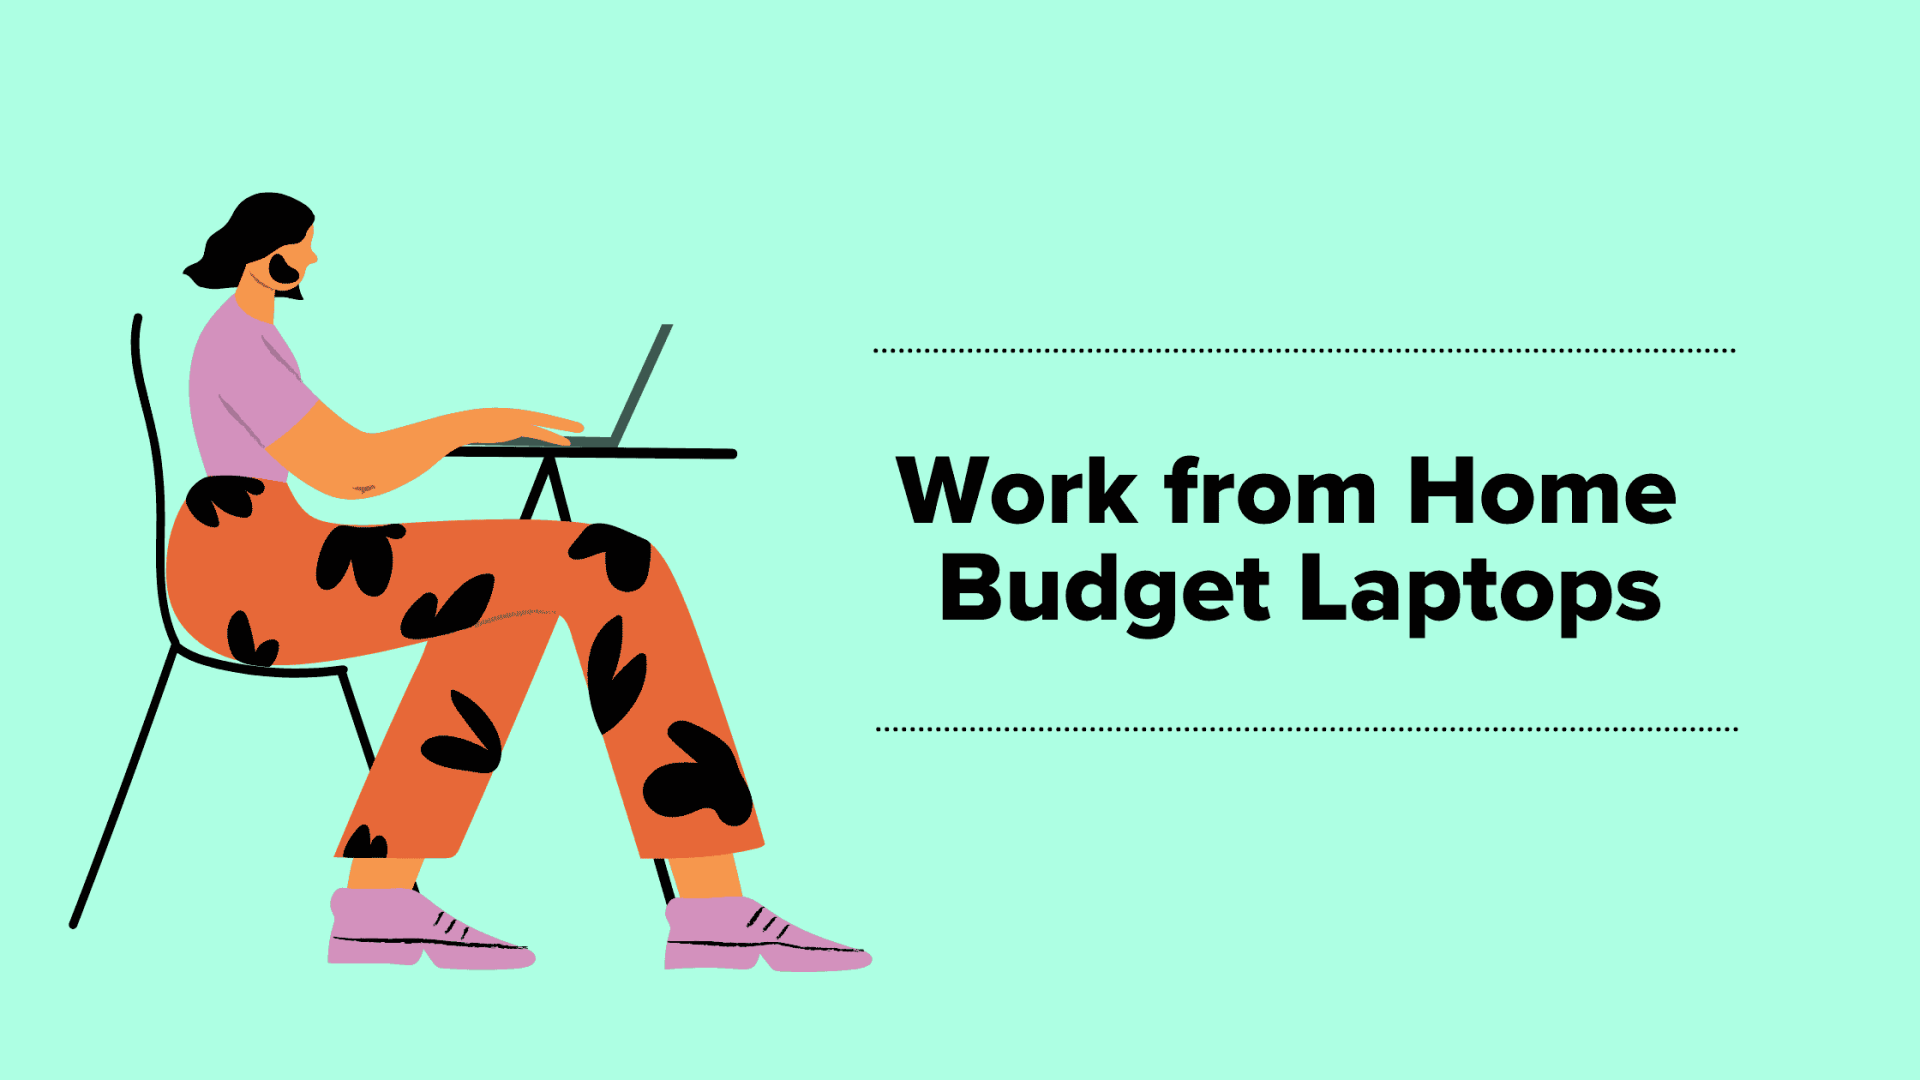 Best Budget Laptops for Working from Home